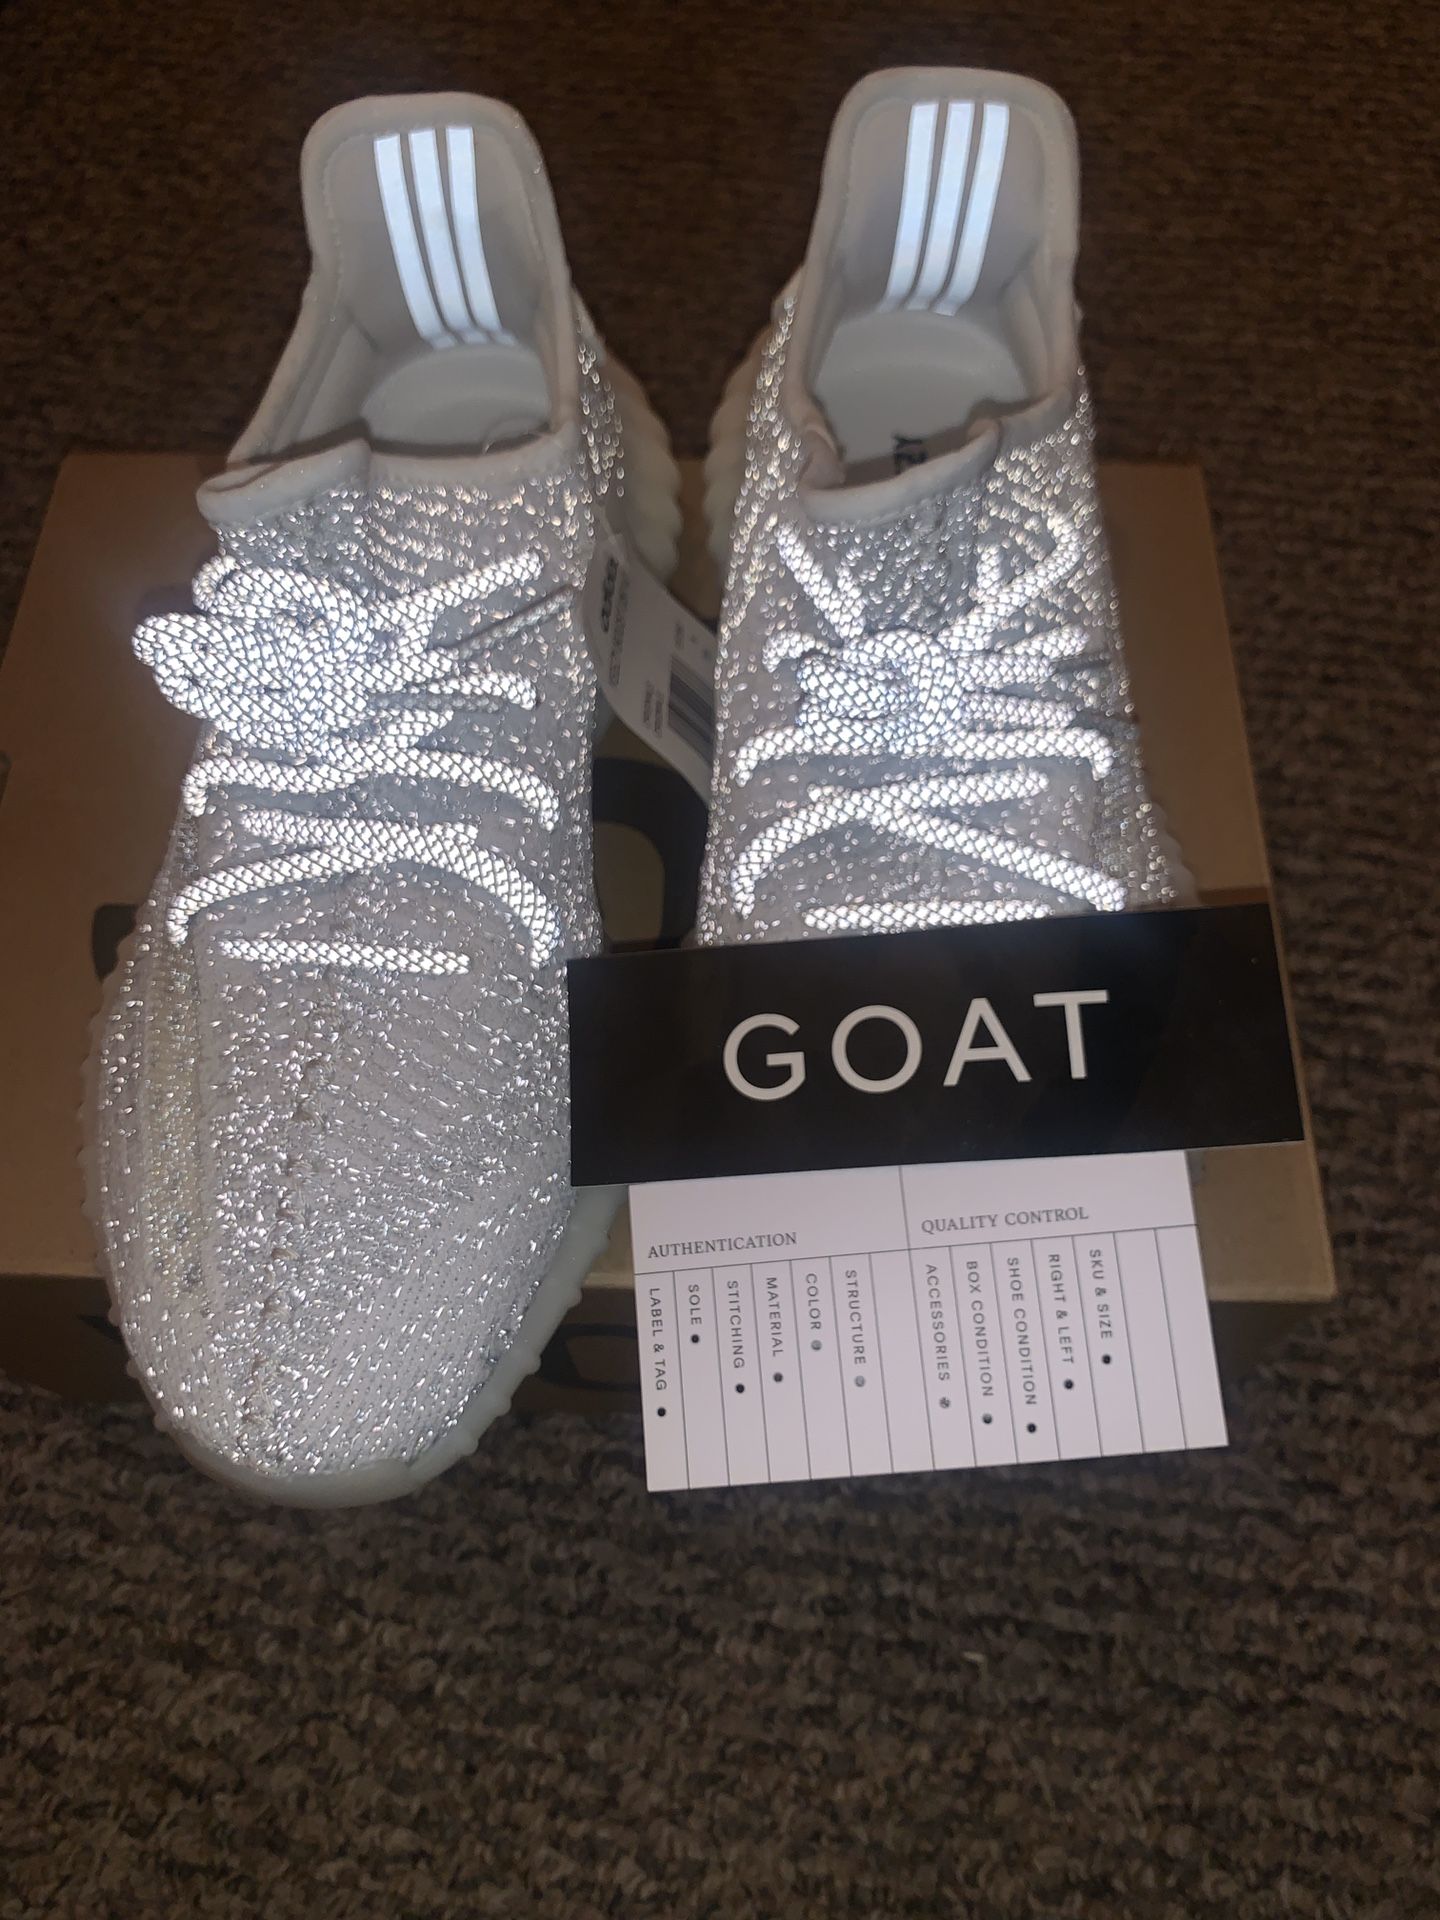 All reflective yeezy static size 8.5